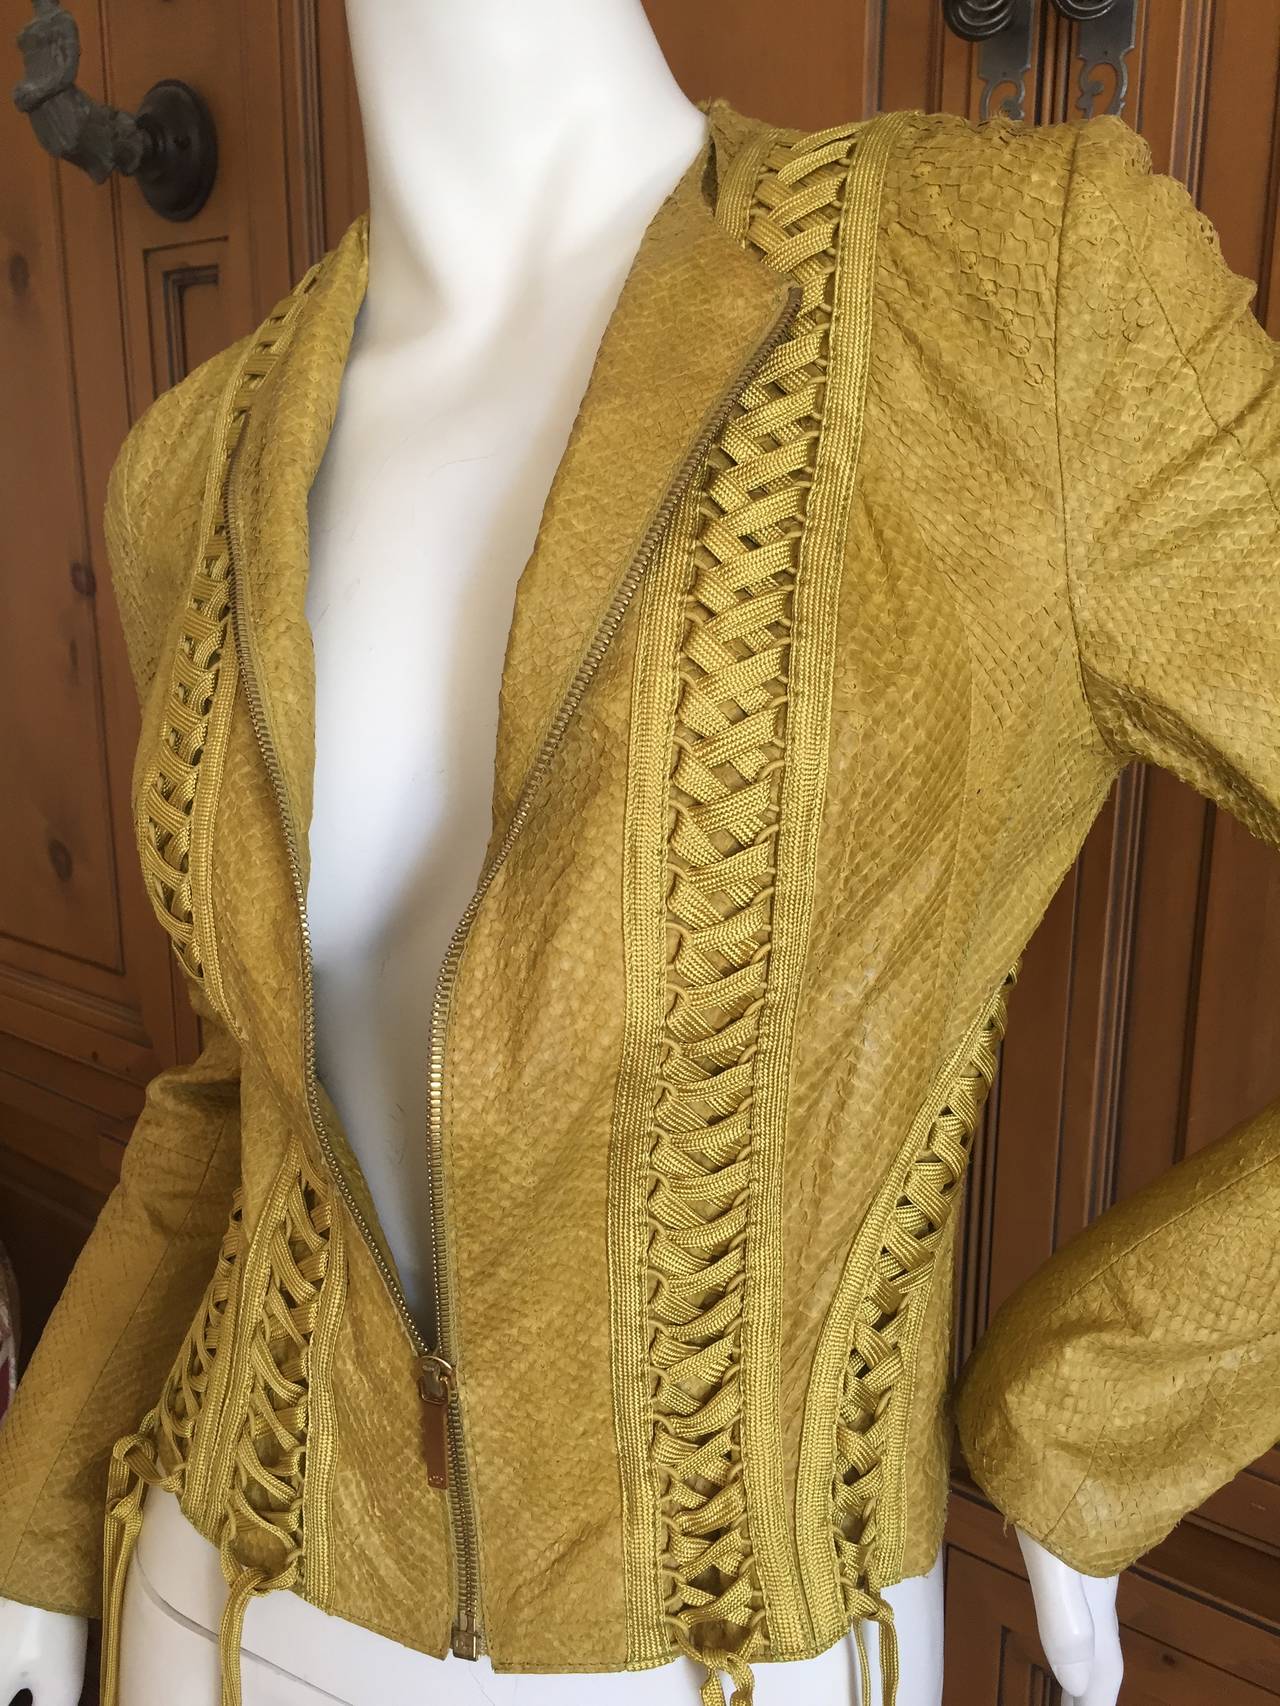 Christian Dior by John Galliano Exotic Skin Corset Lace Jacket.
Ochre colored with corset lacing .
This looks like a type of snakeskin but is created out of a type of fish skin.
Size 38
Bust 36